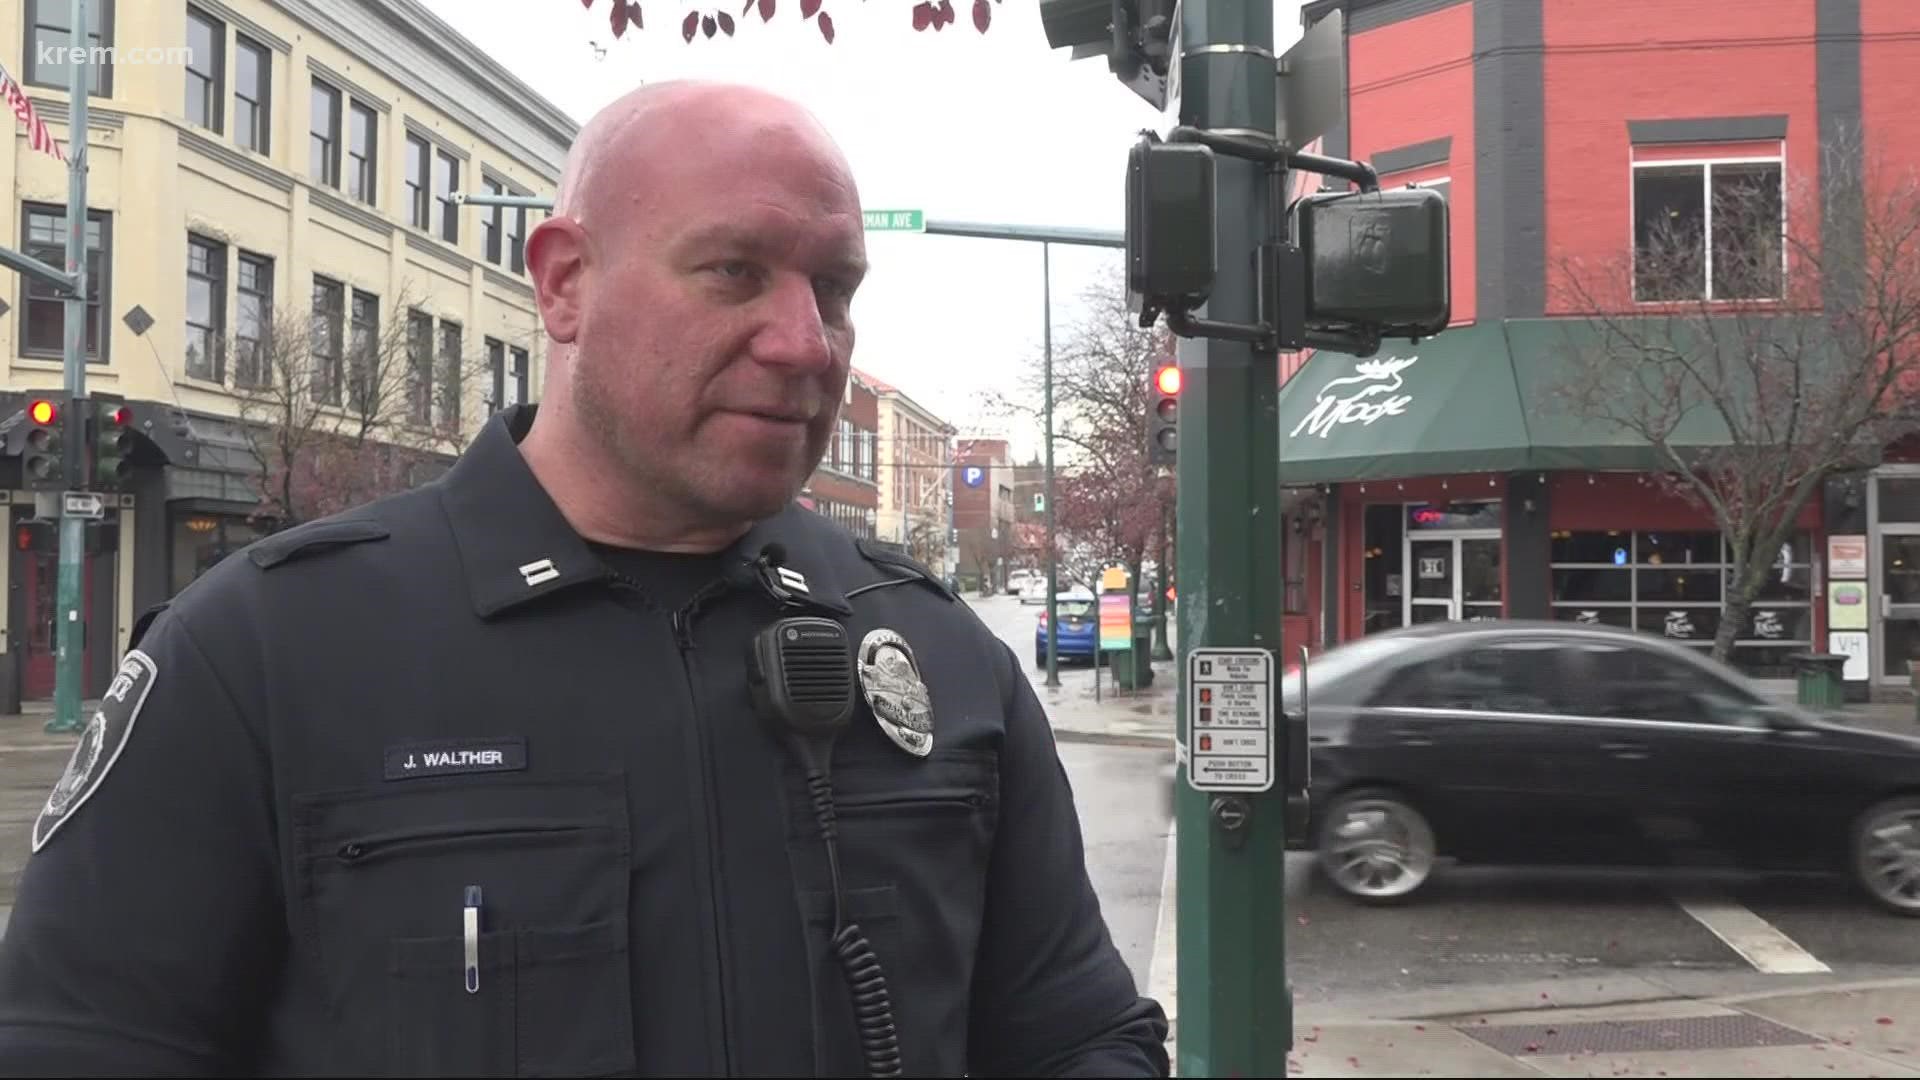 Coeur d'Alene experienced a surge in alcohol-related crimes last winter when bars stayed open during the pandemic. Now, CDA police report an improvement.